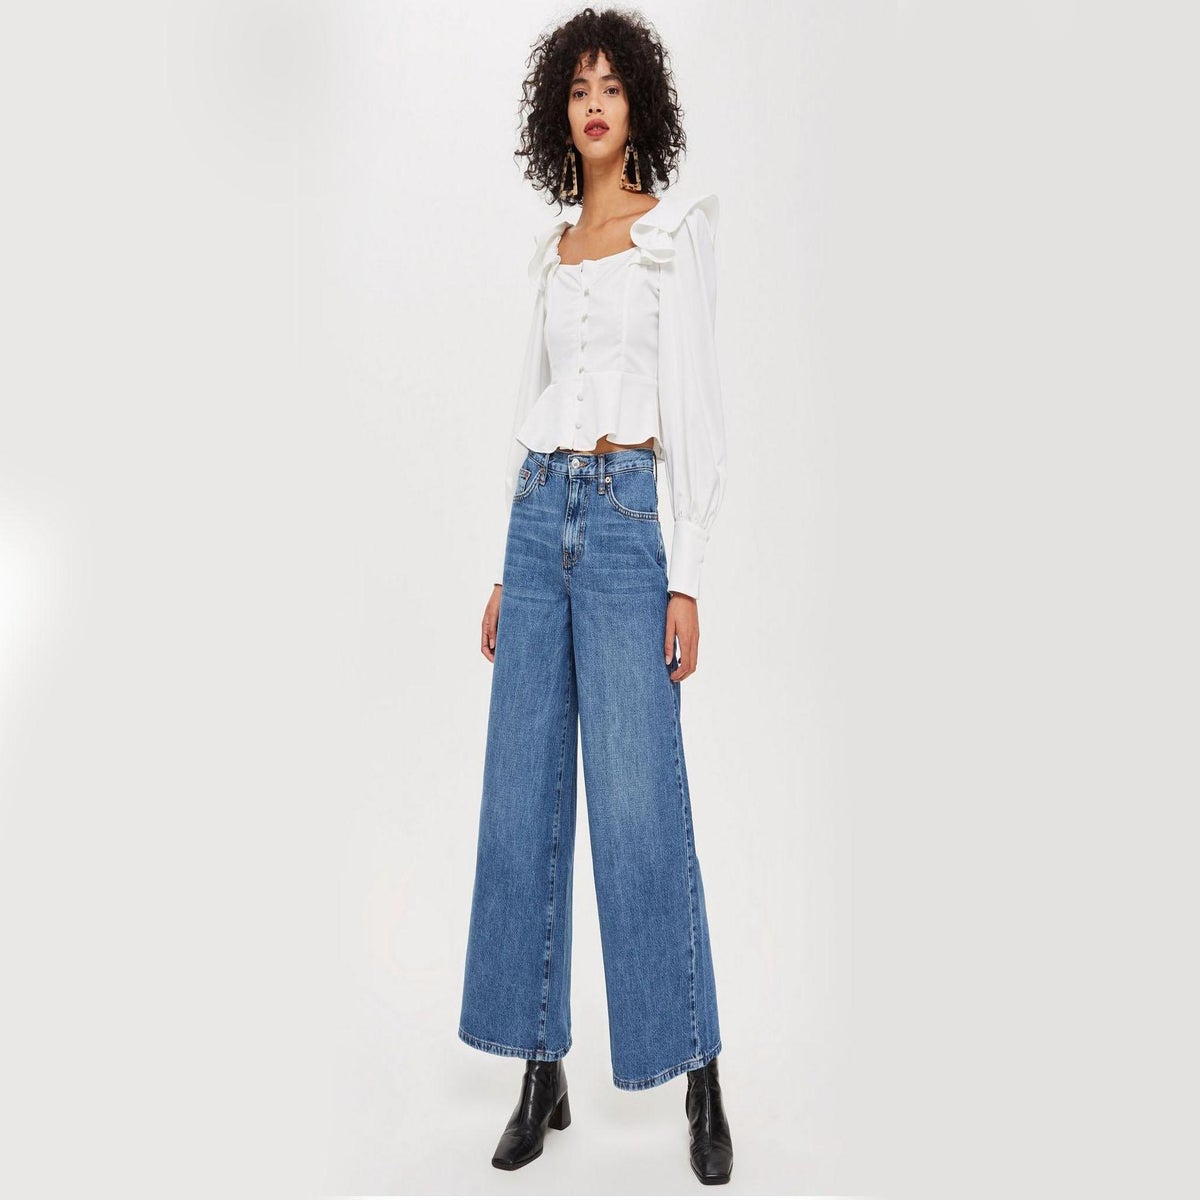 Topshop wide leg jeans in off white